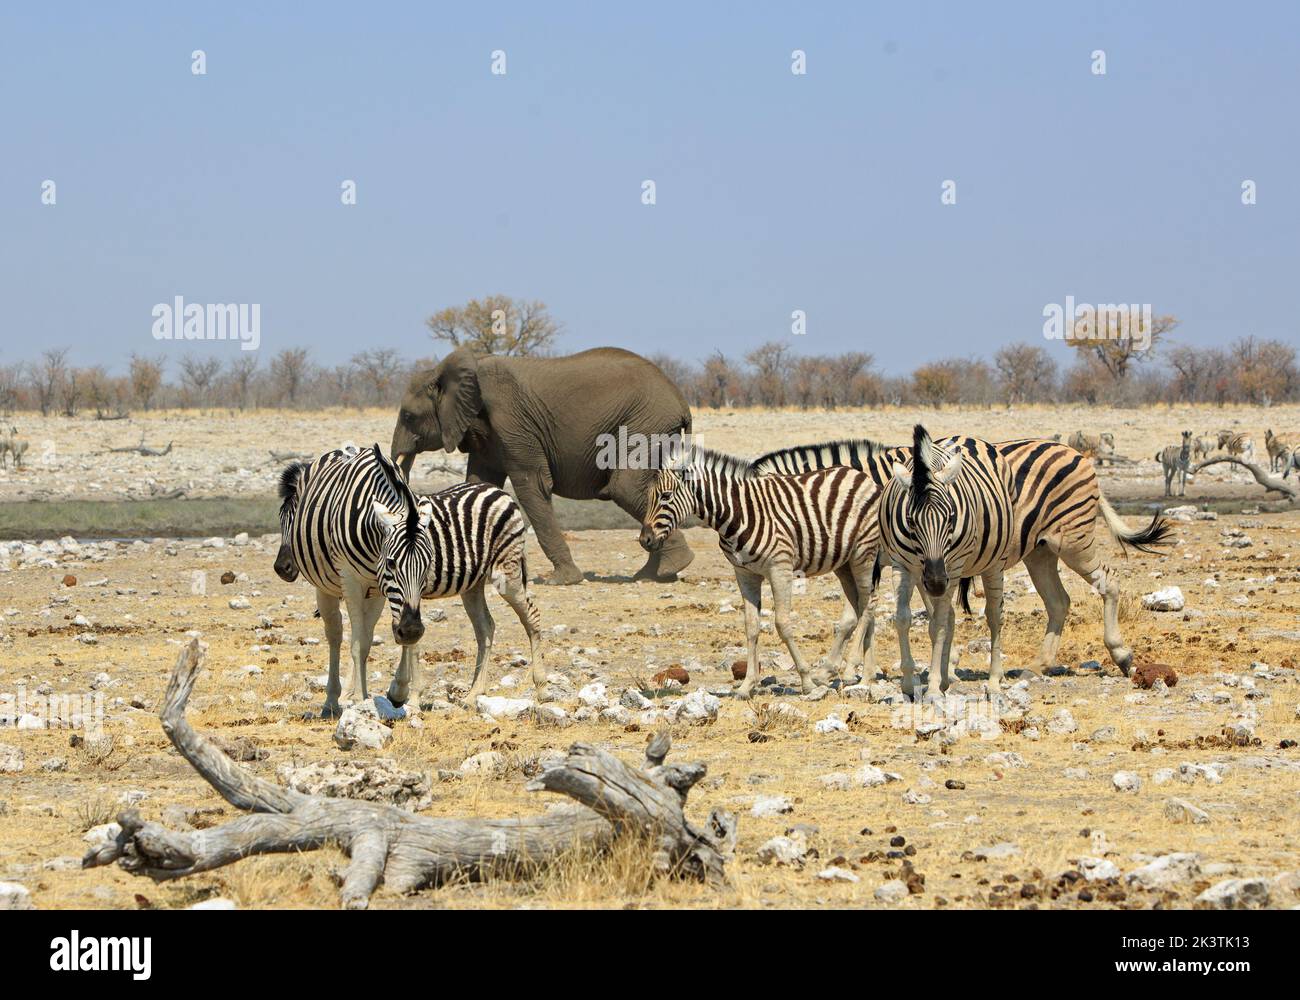 A small herd of Burchells Zebra walking near a waterhole, with a solitary large adult elephant in the background.  Rietfontein, Etosha National Park, Stock Photo